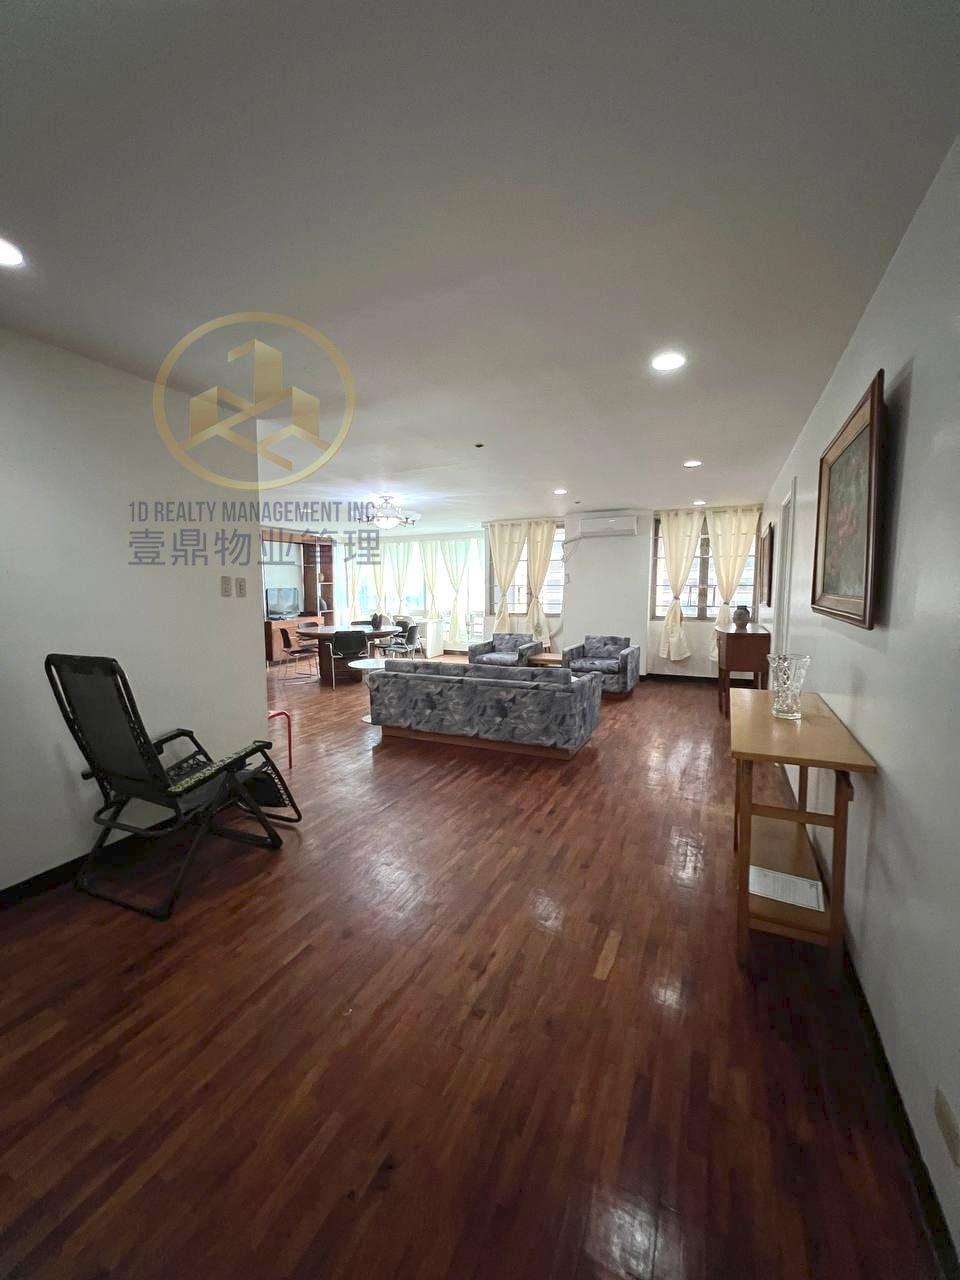 EASTON PLACE Salcedo Village Makati City - For Lease